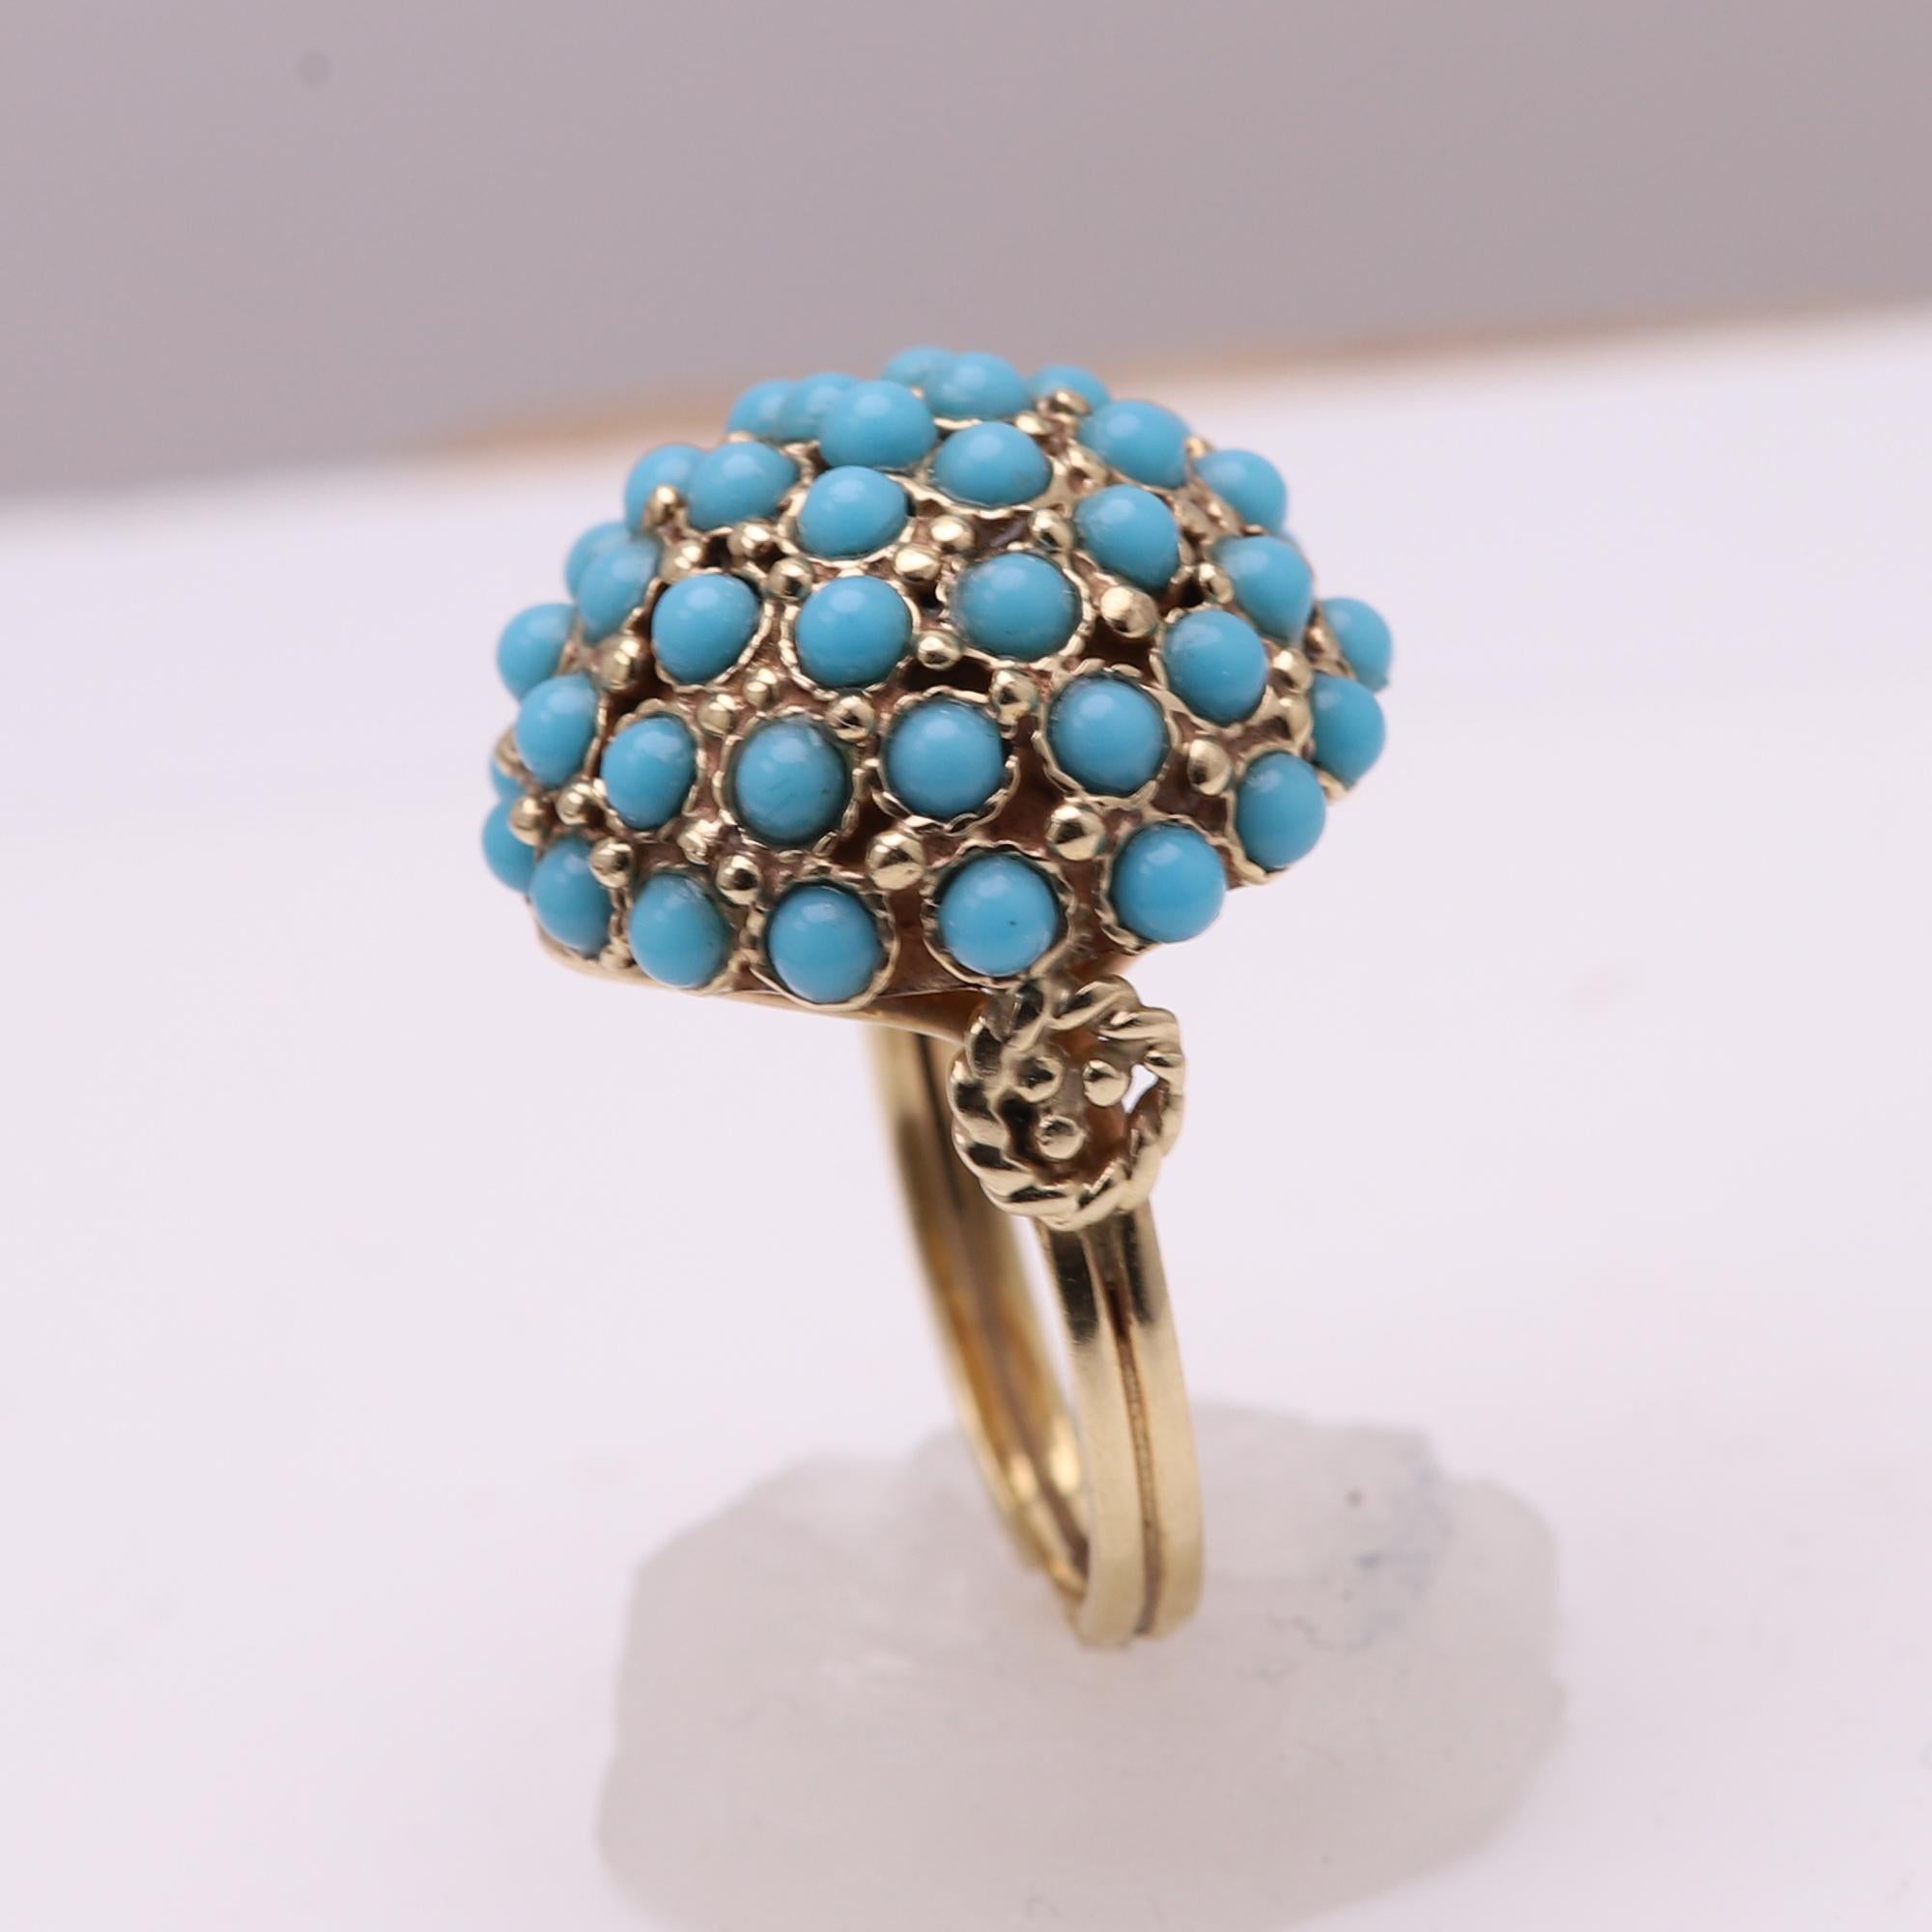 Antique Turquoise Ring 14 Karat Yellow Gold Cluster Design Persian Turquoise In Good Condition For Sale In Brooklyn, NY